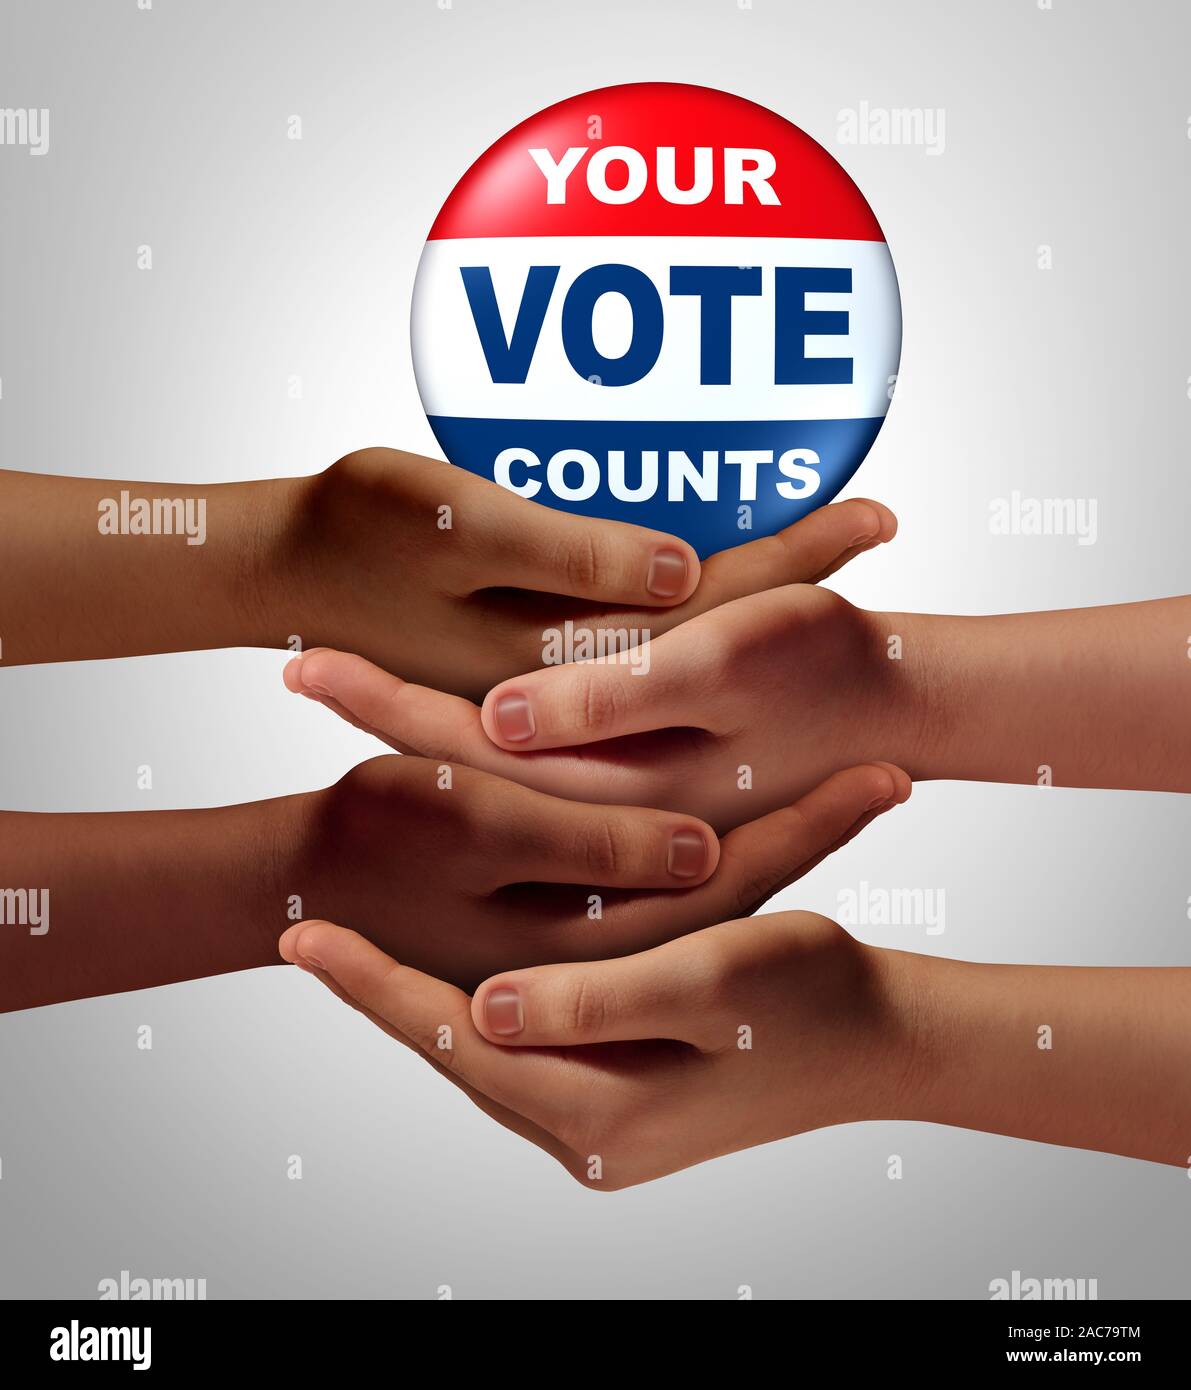 Citizen vote and voters or voting citizens during an election for president or prime minister and senate as a democracy and democratic. Stock Photo